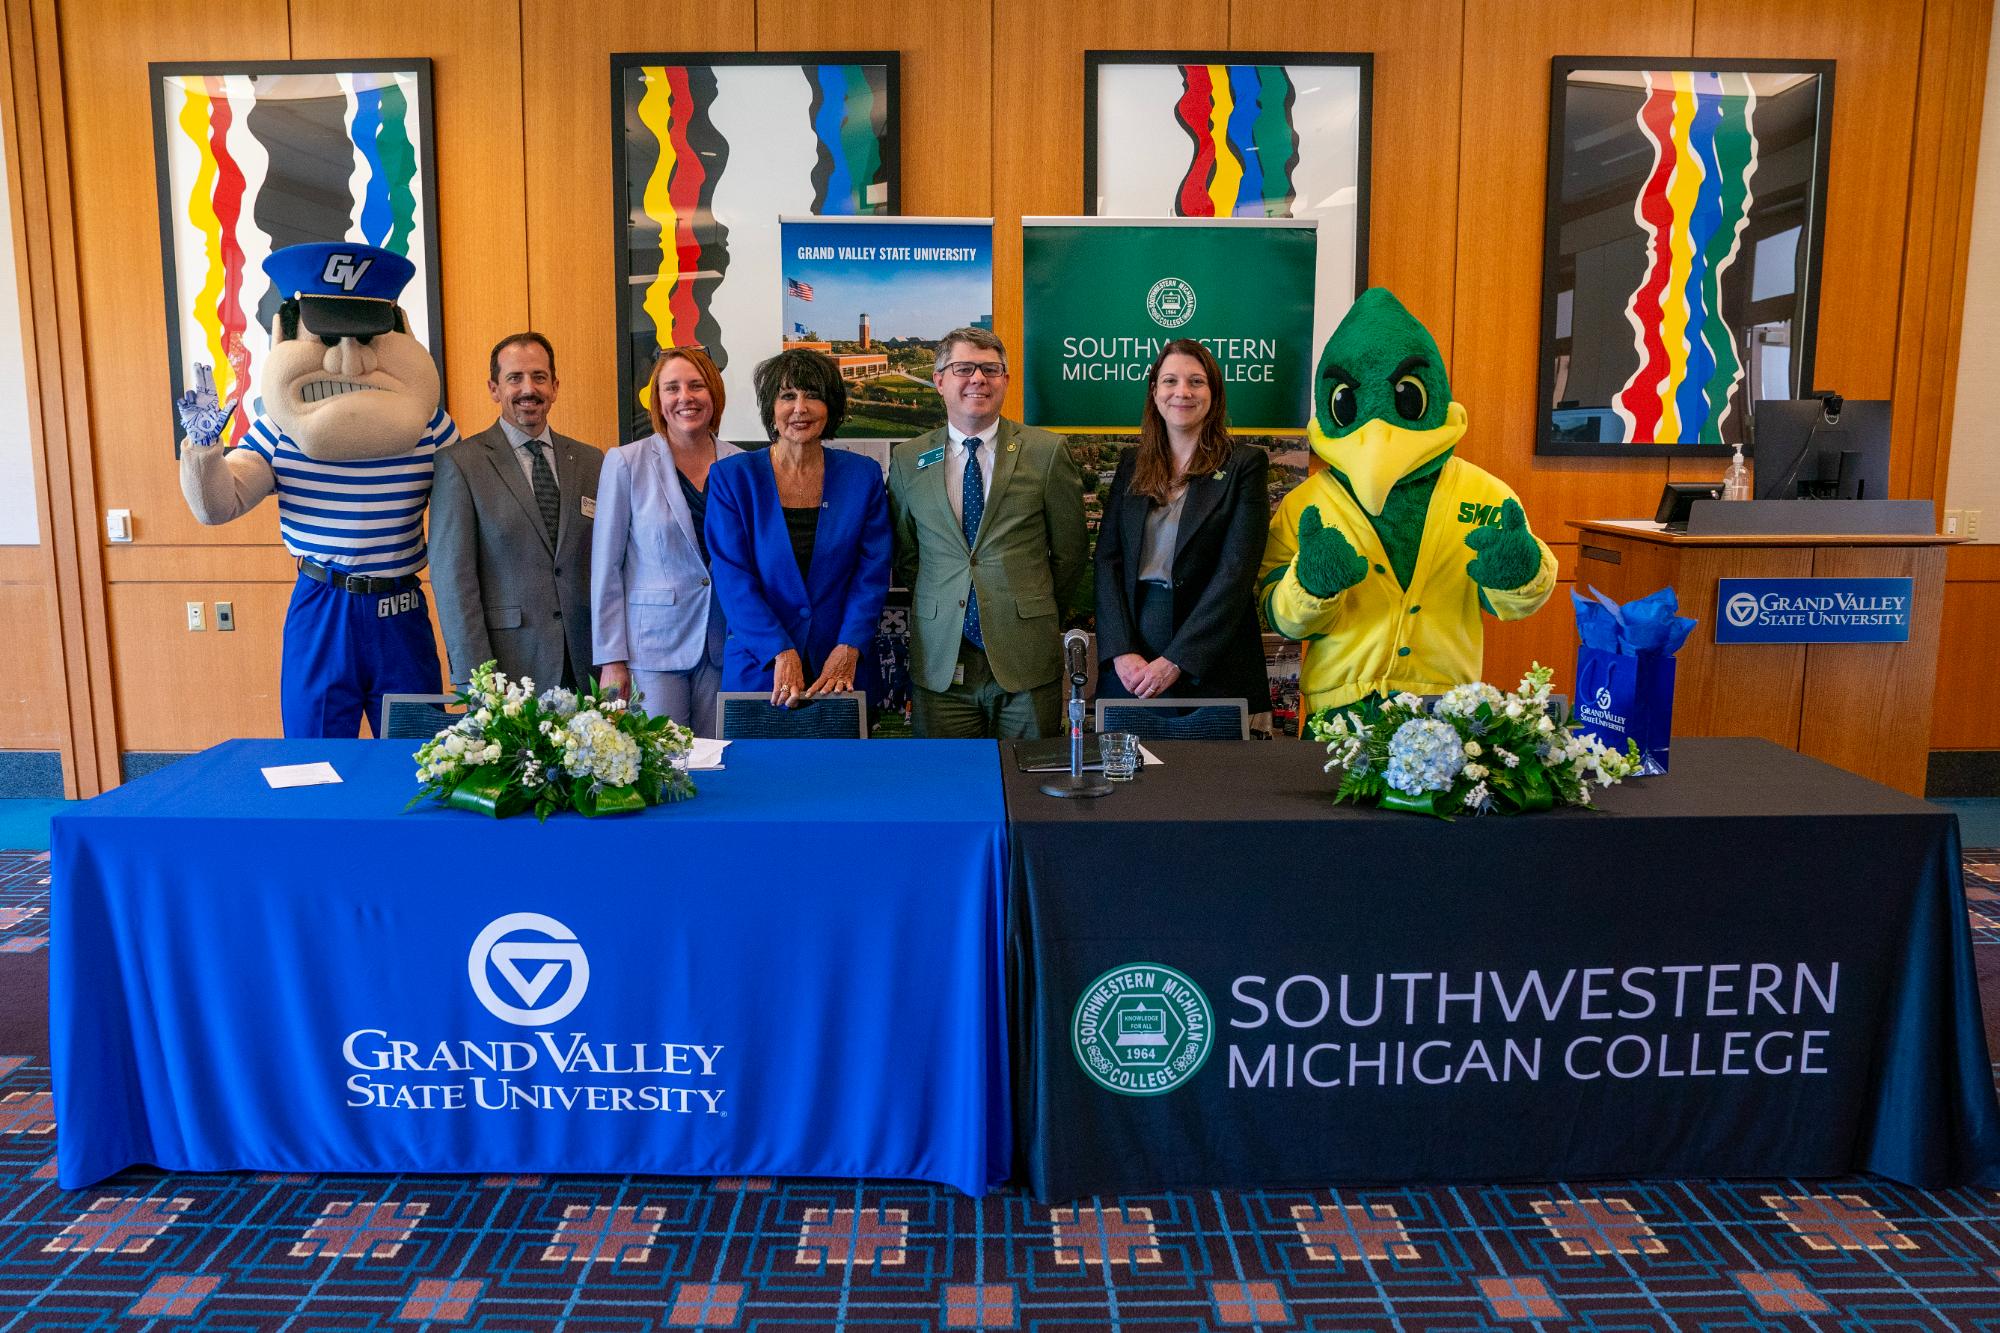 GVSU representative and SMC representatives standing behind tables and respective college banners